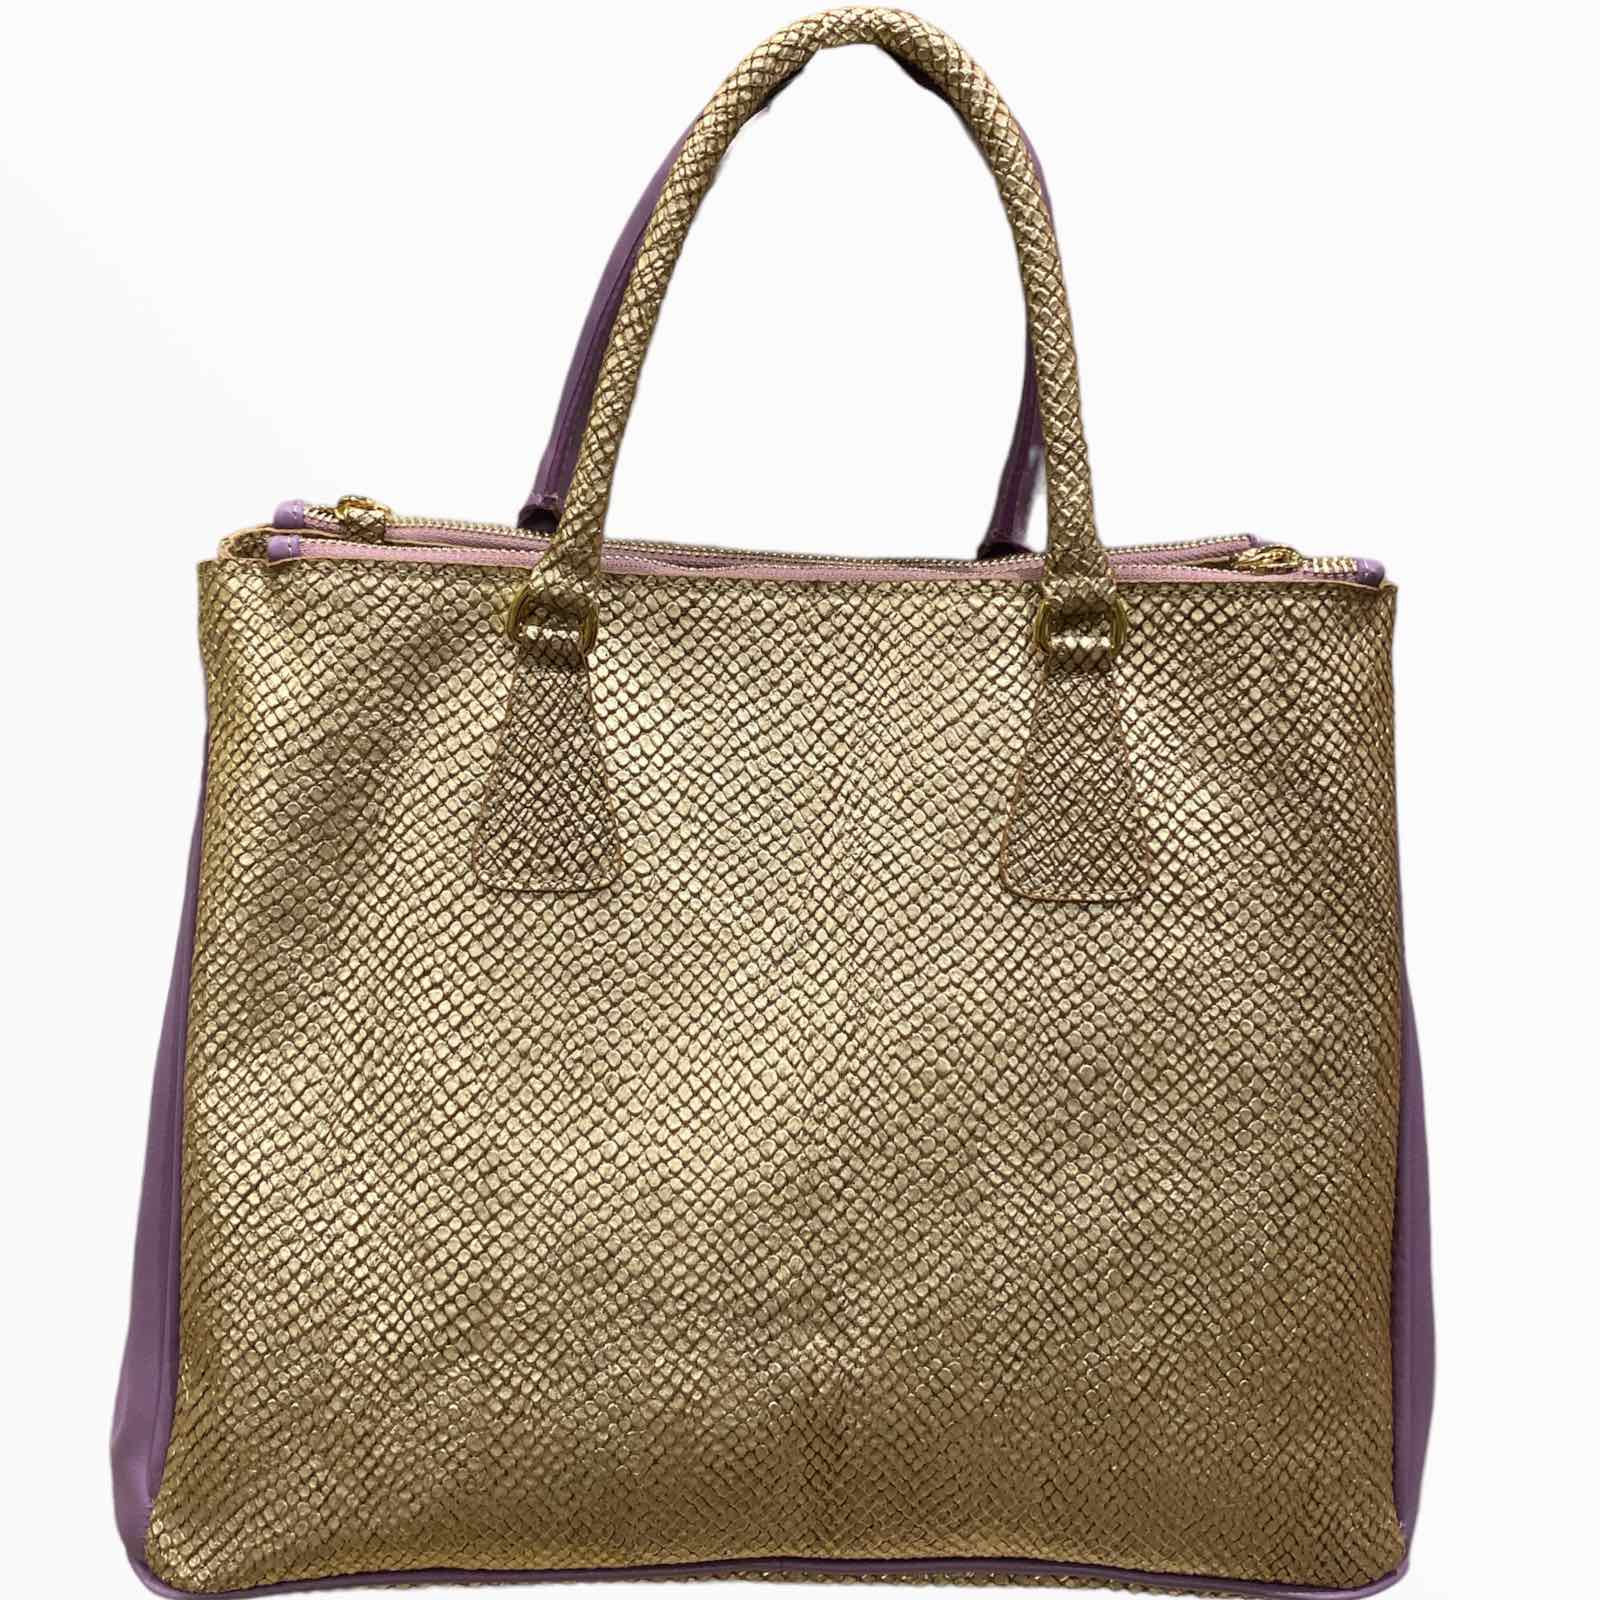 Diana L. Lilac and gold leather tote bag